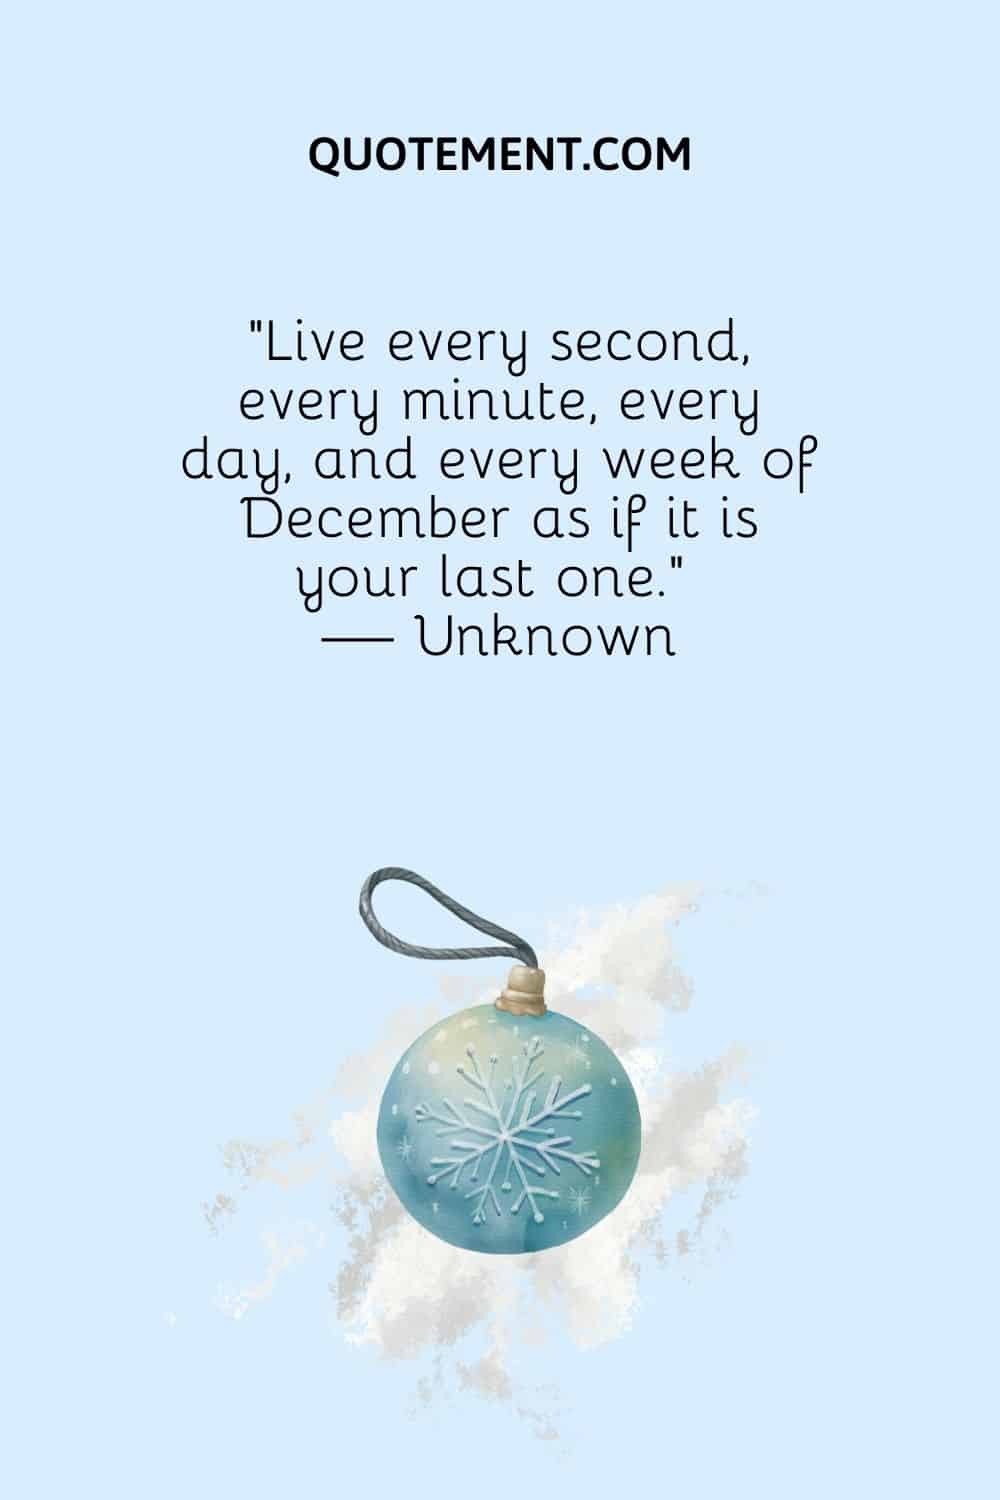 “Live every second, every minute, every day, and every week of December as if it is your last one.” — Unknown